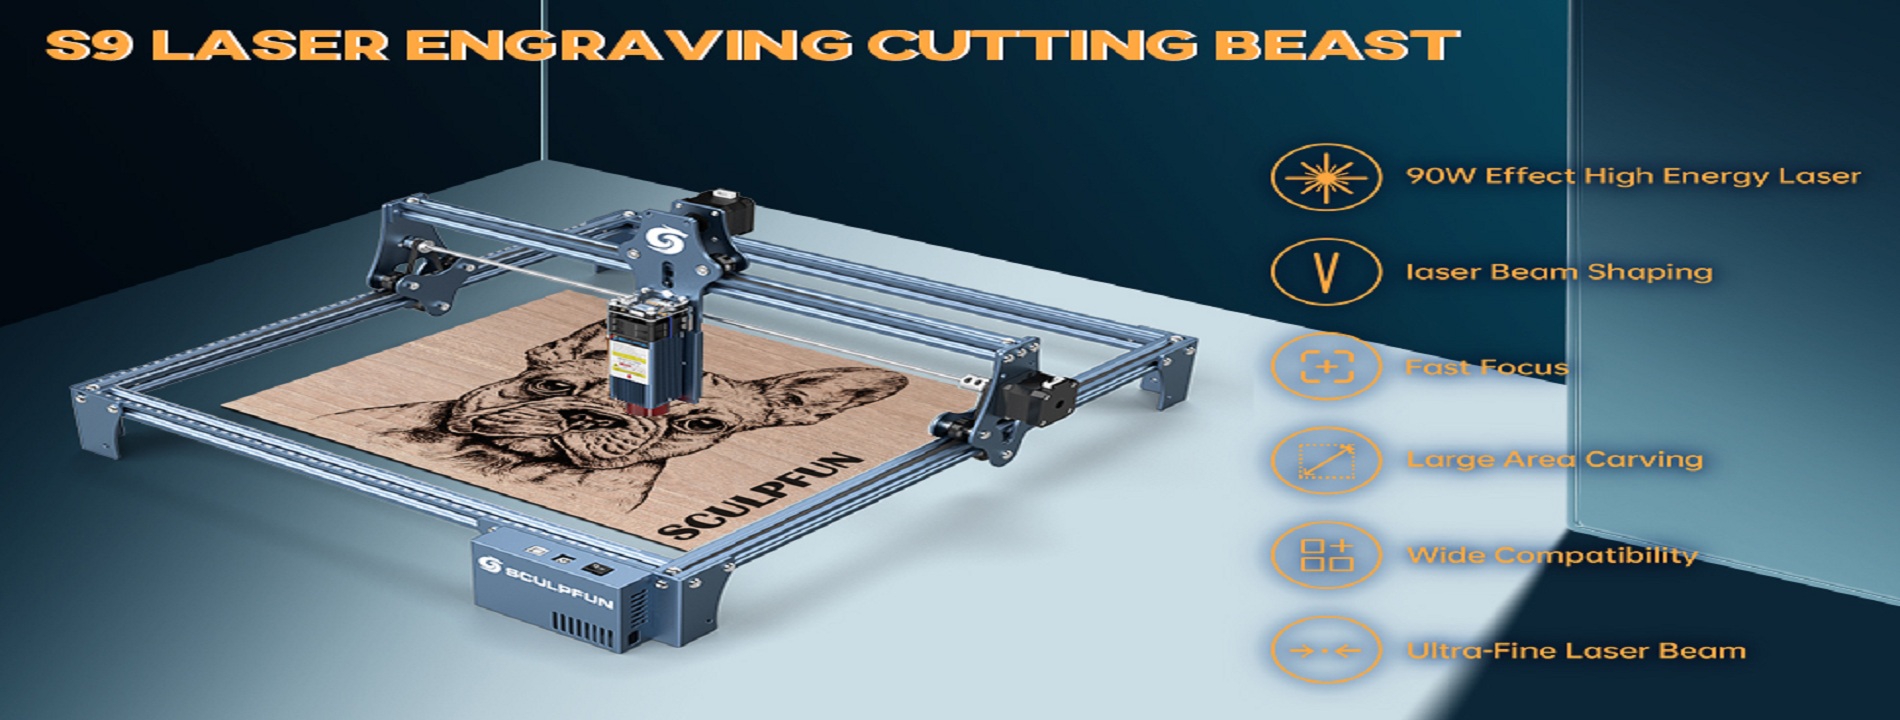 SCULPFUN S9 Laser Engraver with 400x400mm Honeycomb Laser Bed, 90W Effect  High Precision CNC Laser Engraving Cutting Machine, High Energy Laser Cutter